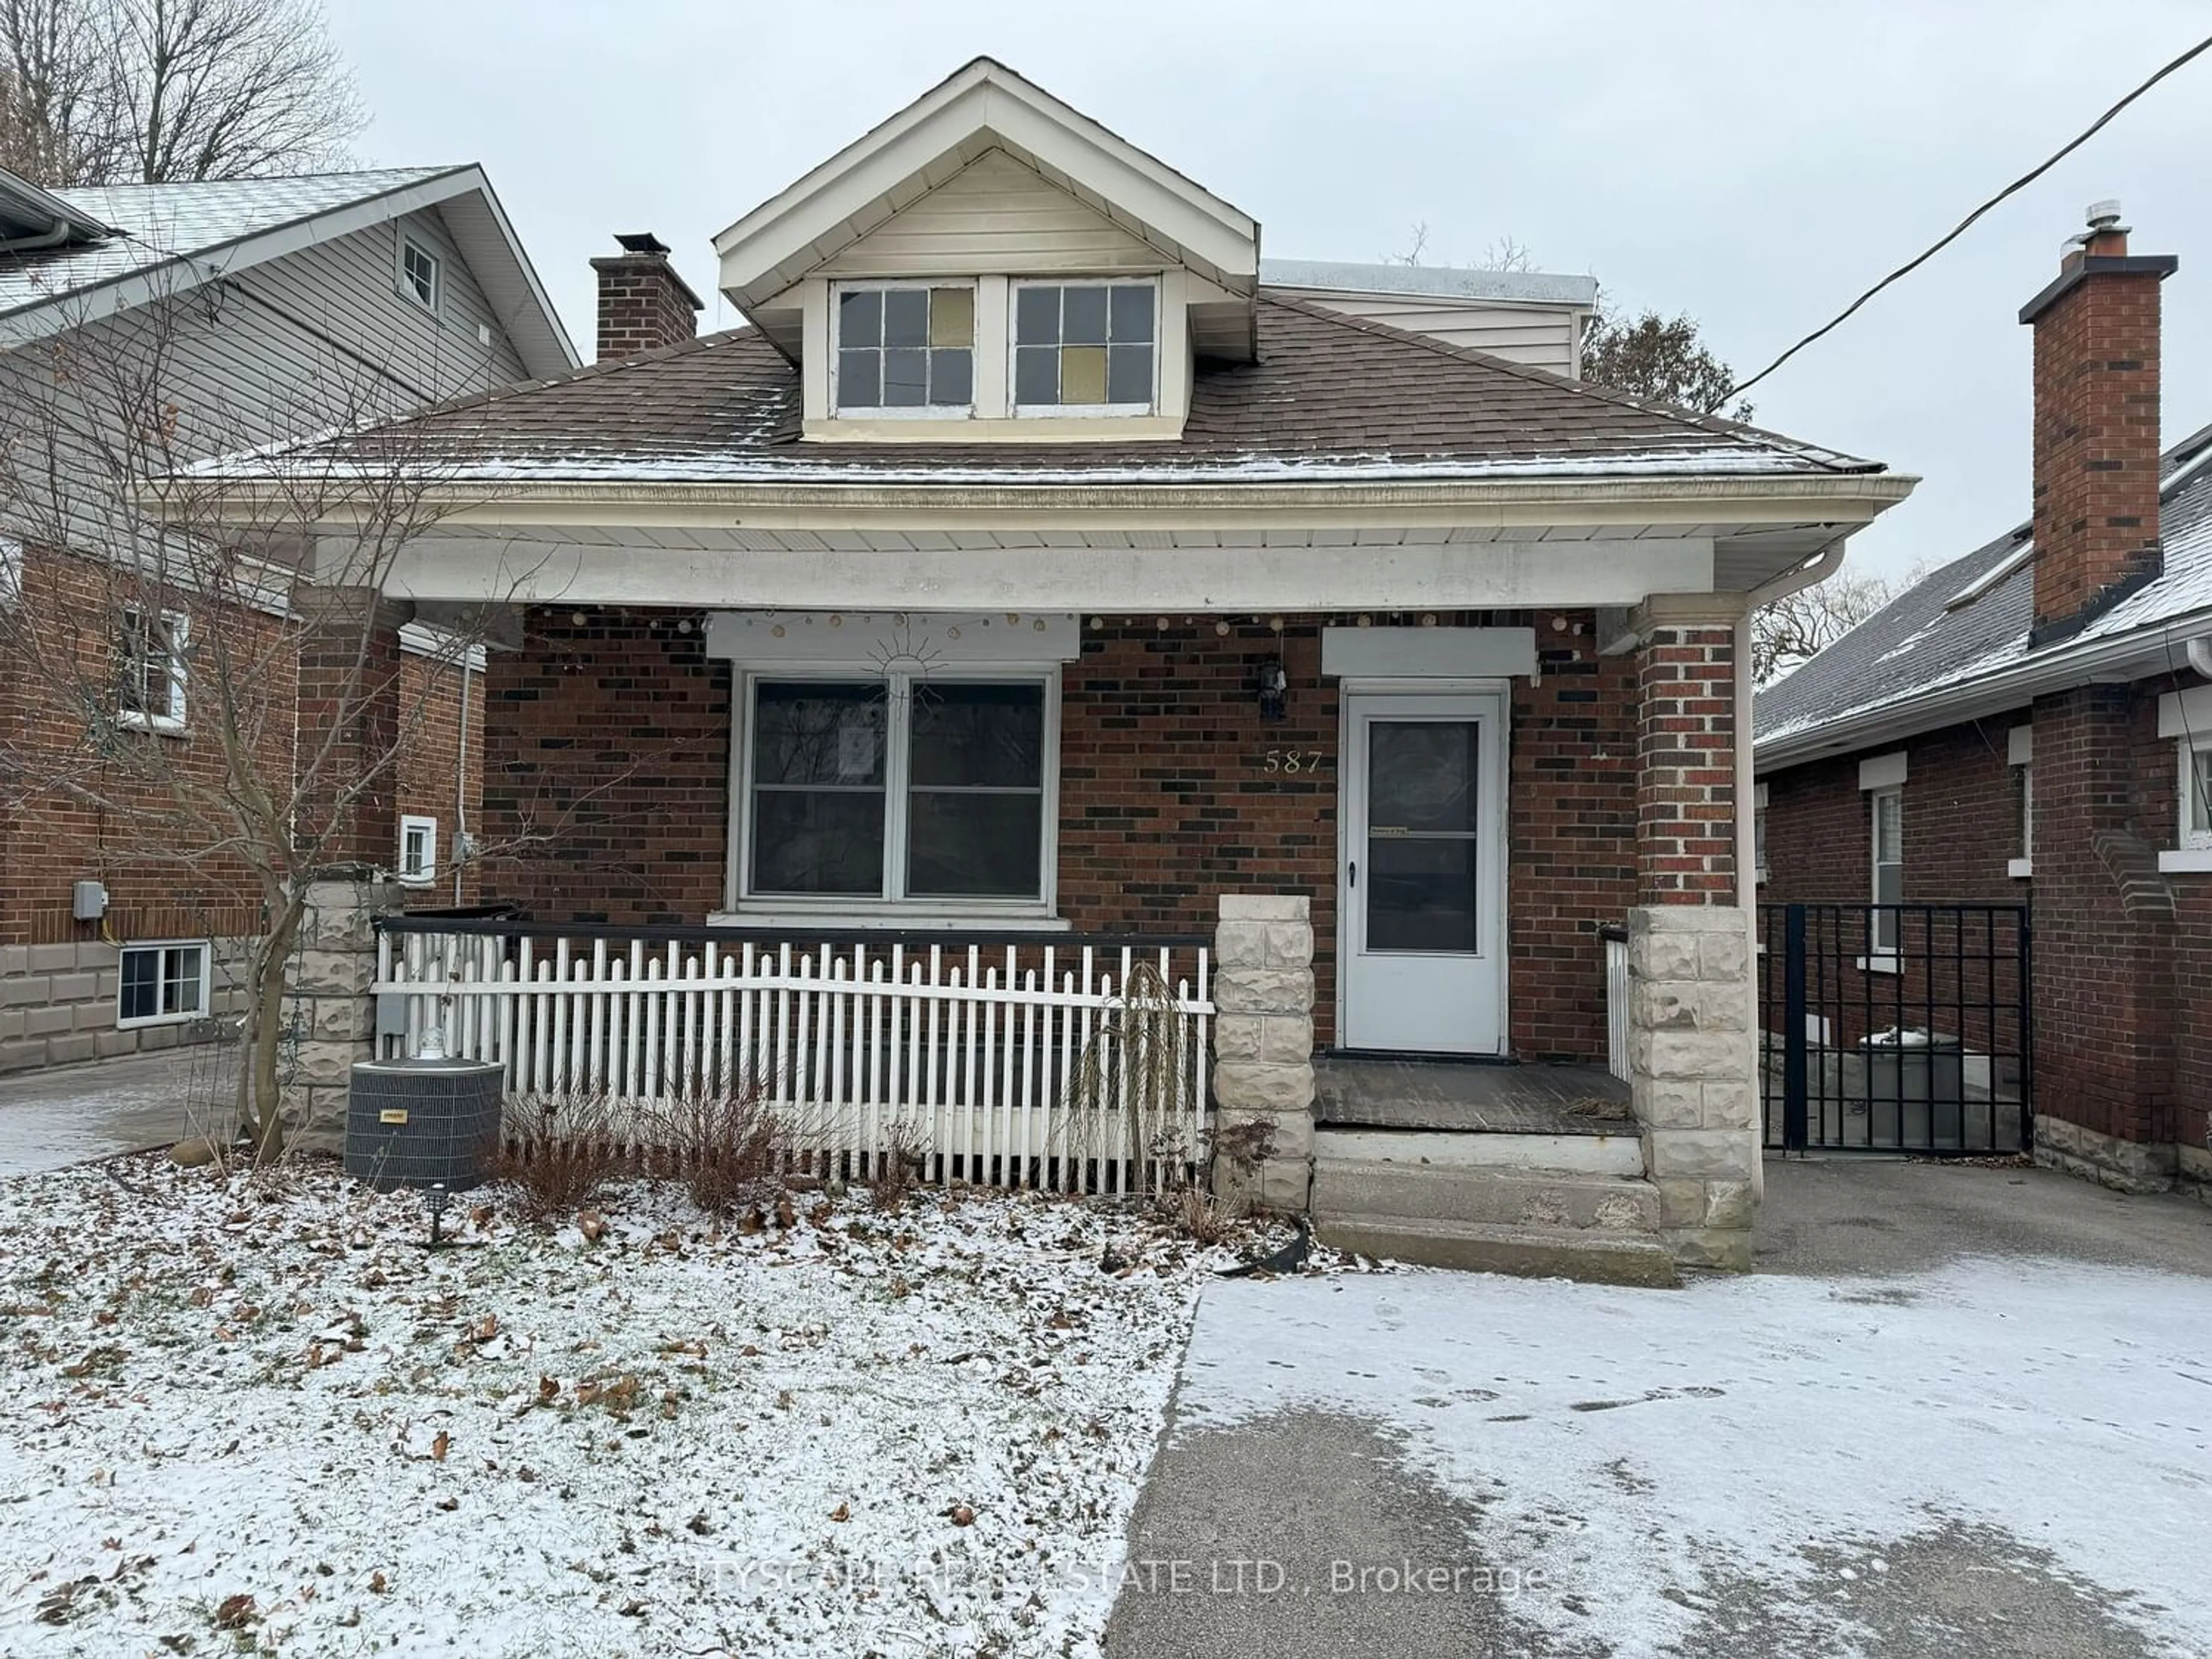 Home with unknown exterior material for 587 Grosvenor St, London Ontario N5Y 3T2